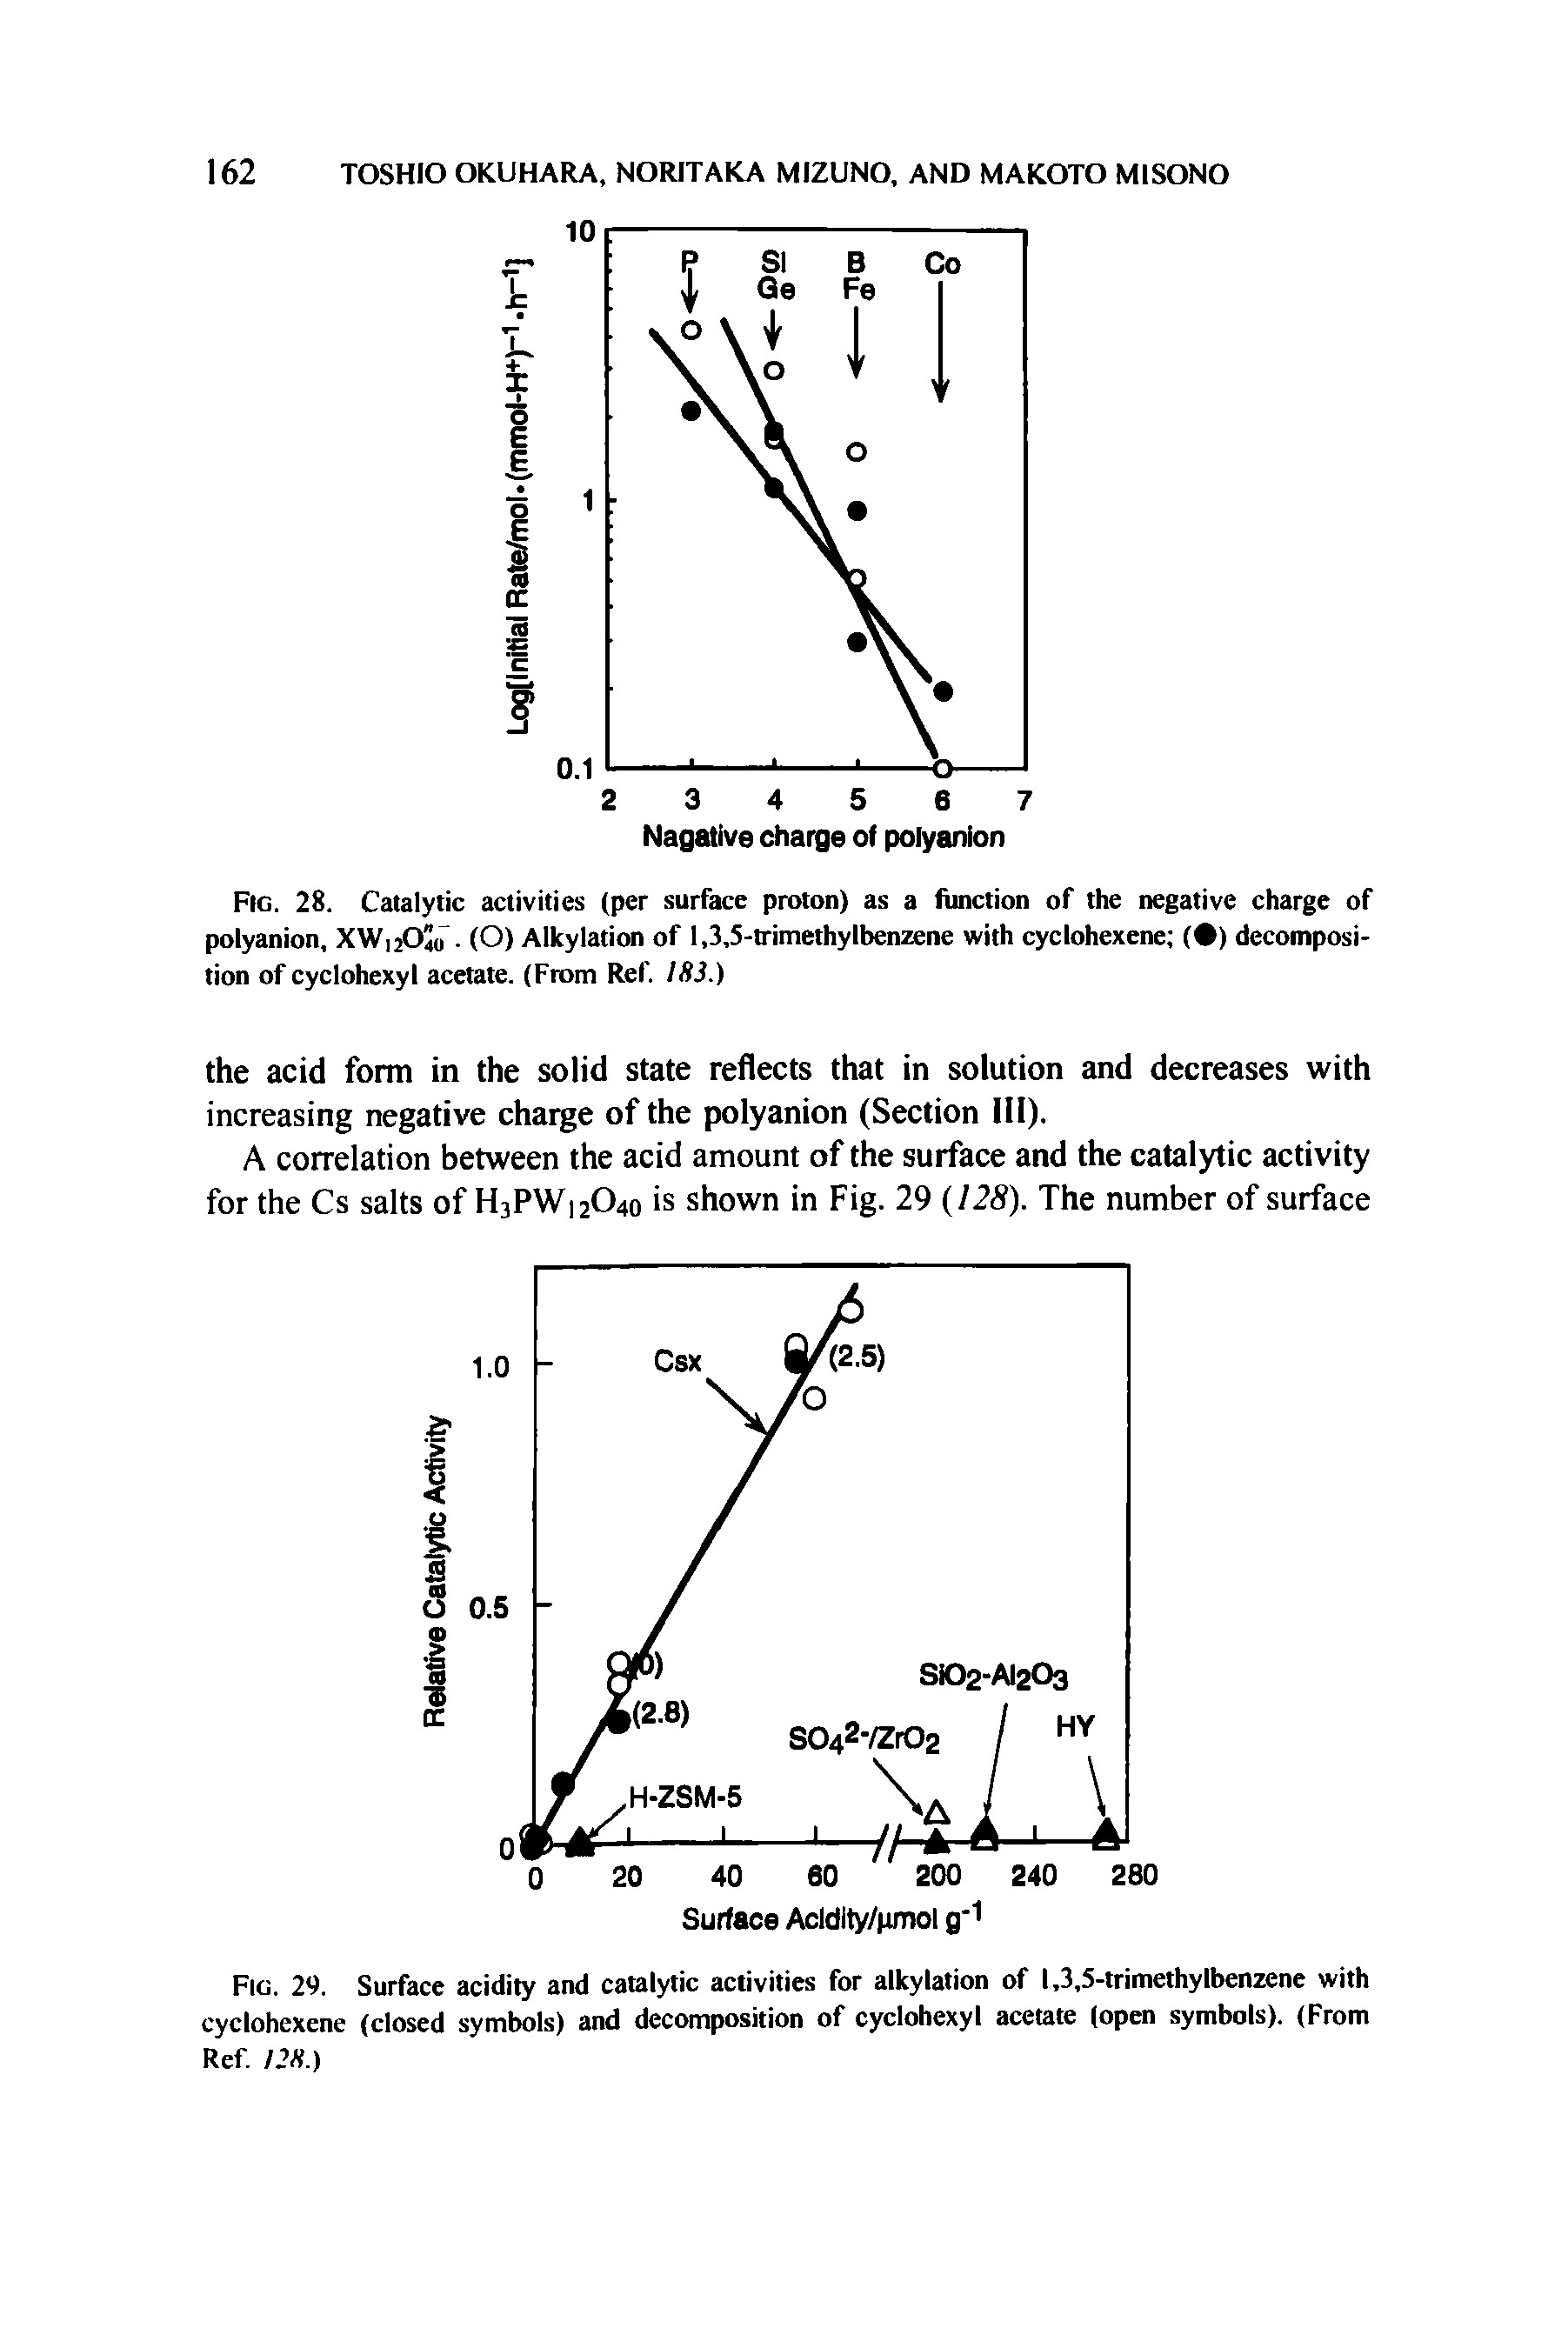 Fig. 28. Catalytic activities (per surface proton) as a function of the negative charge of polyanion, XW12O40. (O) Alkylation of 1,3,5-trimethyIbenzene with cyclohexene ( ) decomposition of cyclohexyl acetate. (From Ref. 183.)...